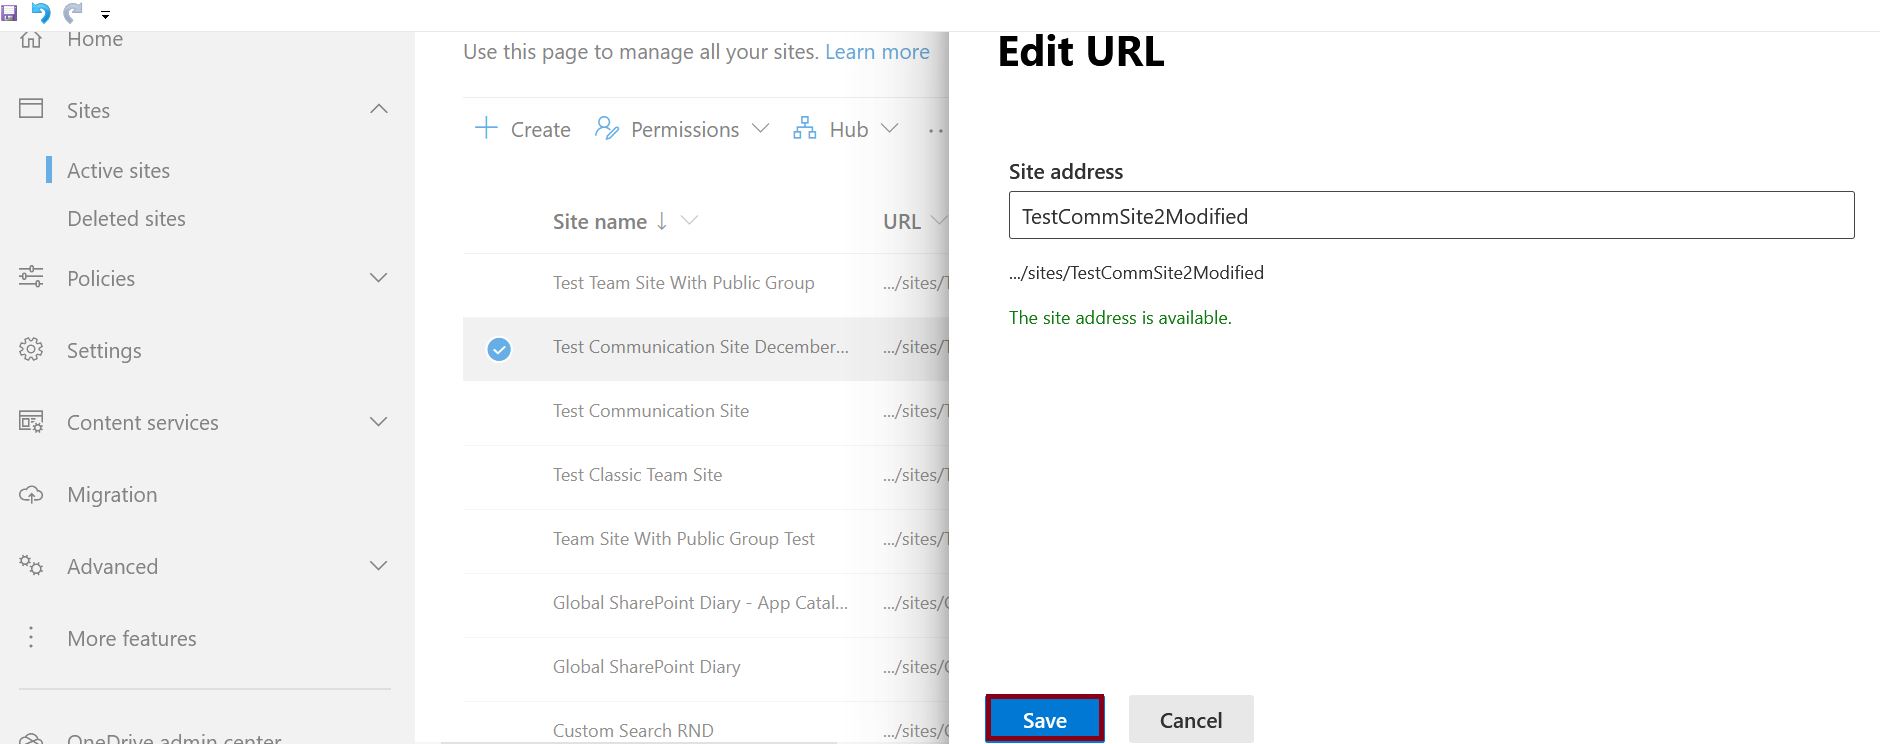 Change site URL in SharePoint online, the site address is available validation message and click on the save button